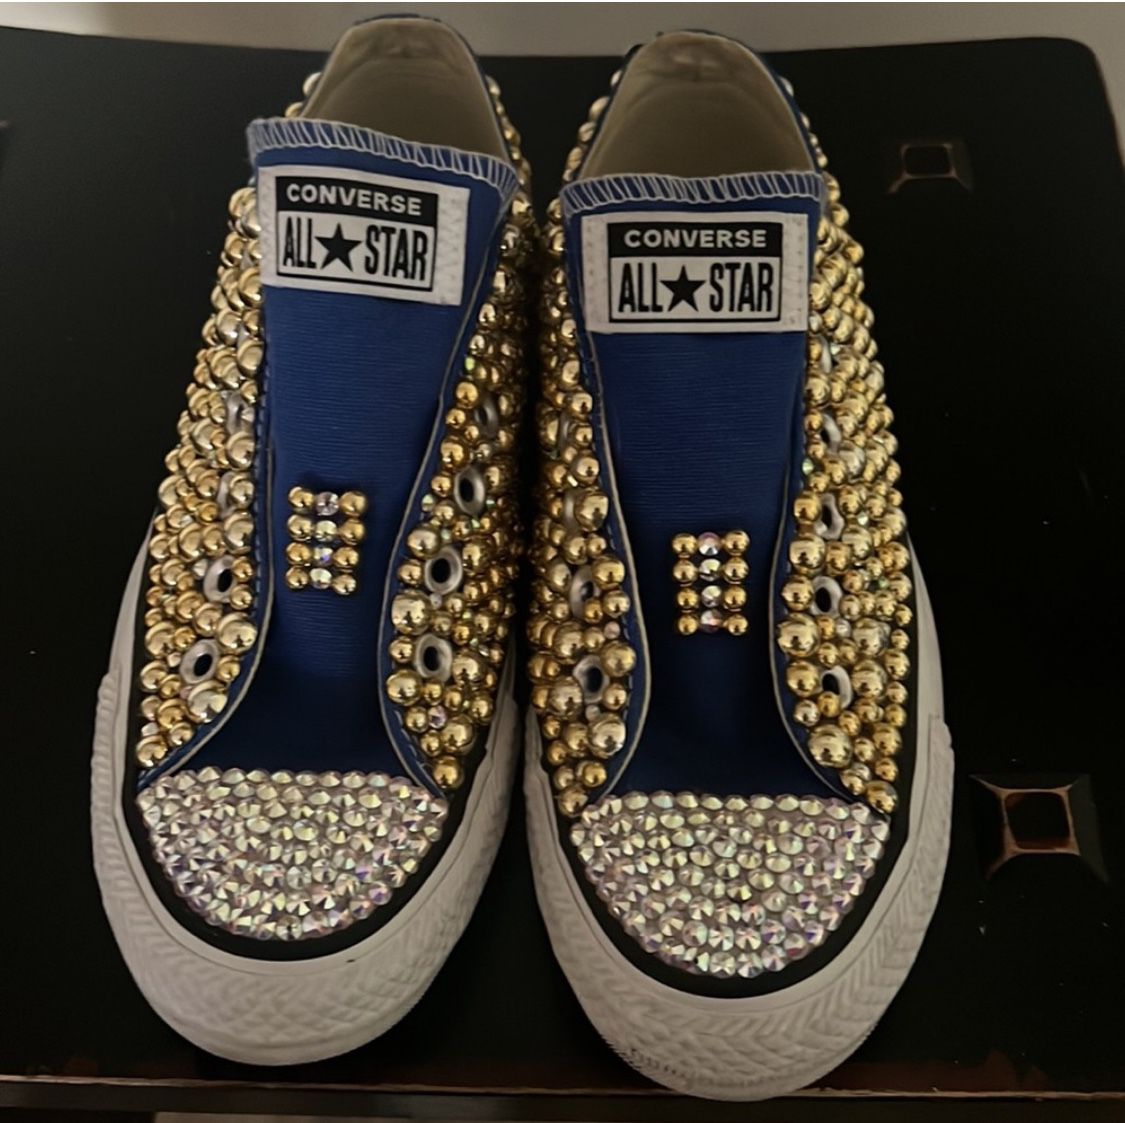 Converse Unisex All Star Chuck Taylor Low Top, blue & gold Rhinestoned, SZ 6.5